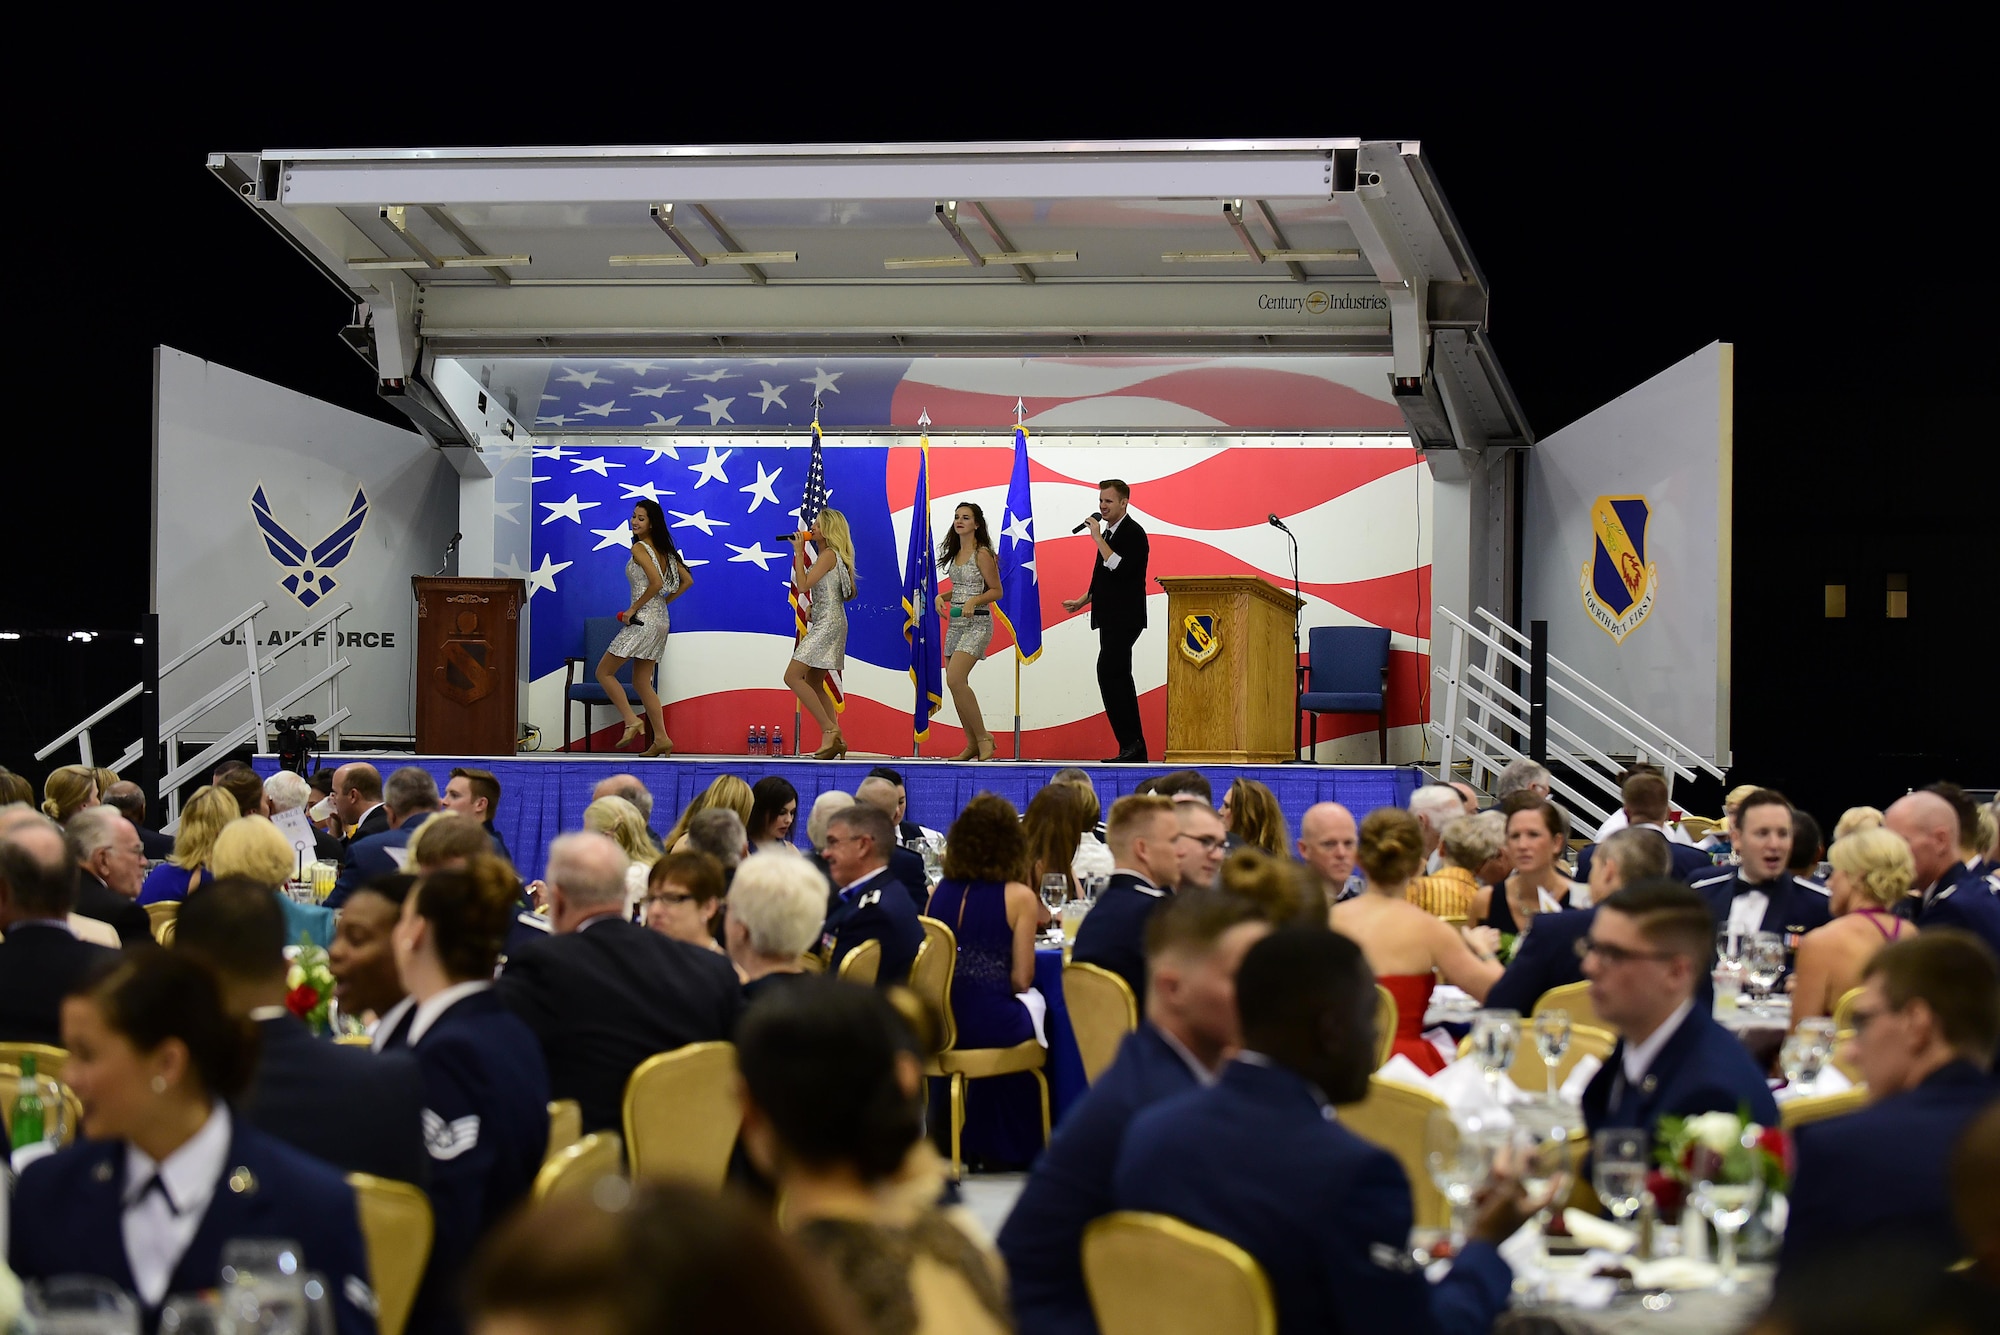 The USO Show Troupe performs during the 4th Fighter Wing 75th Anniversary Gala, Sept. 16, 2017, at Seymour Johnson Air Force Base, North Carolina. More than 400 people attended the gala. (U.S. Air Force photo by Airman 1st Class Kenneth Boyton)